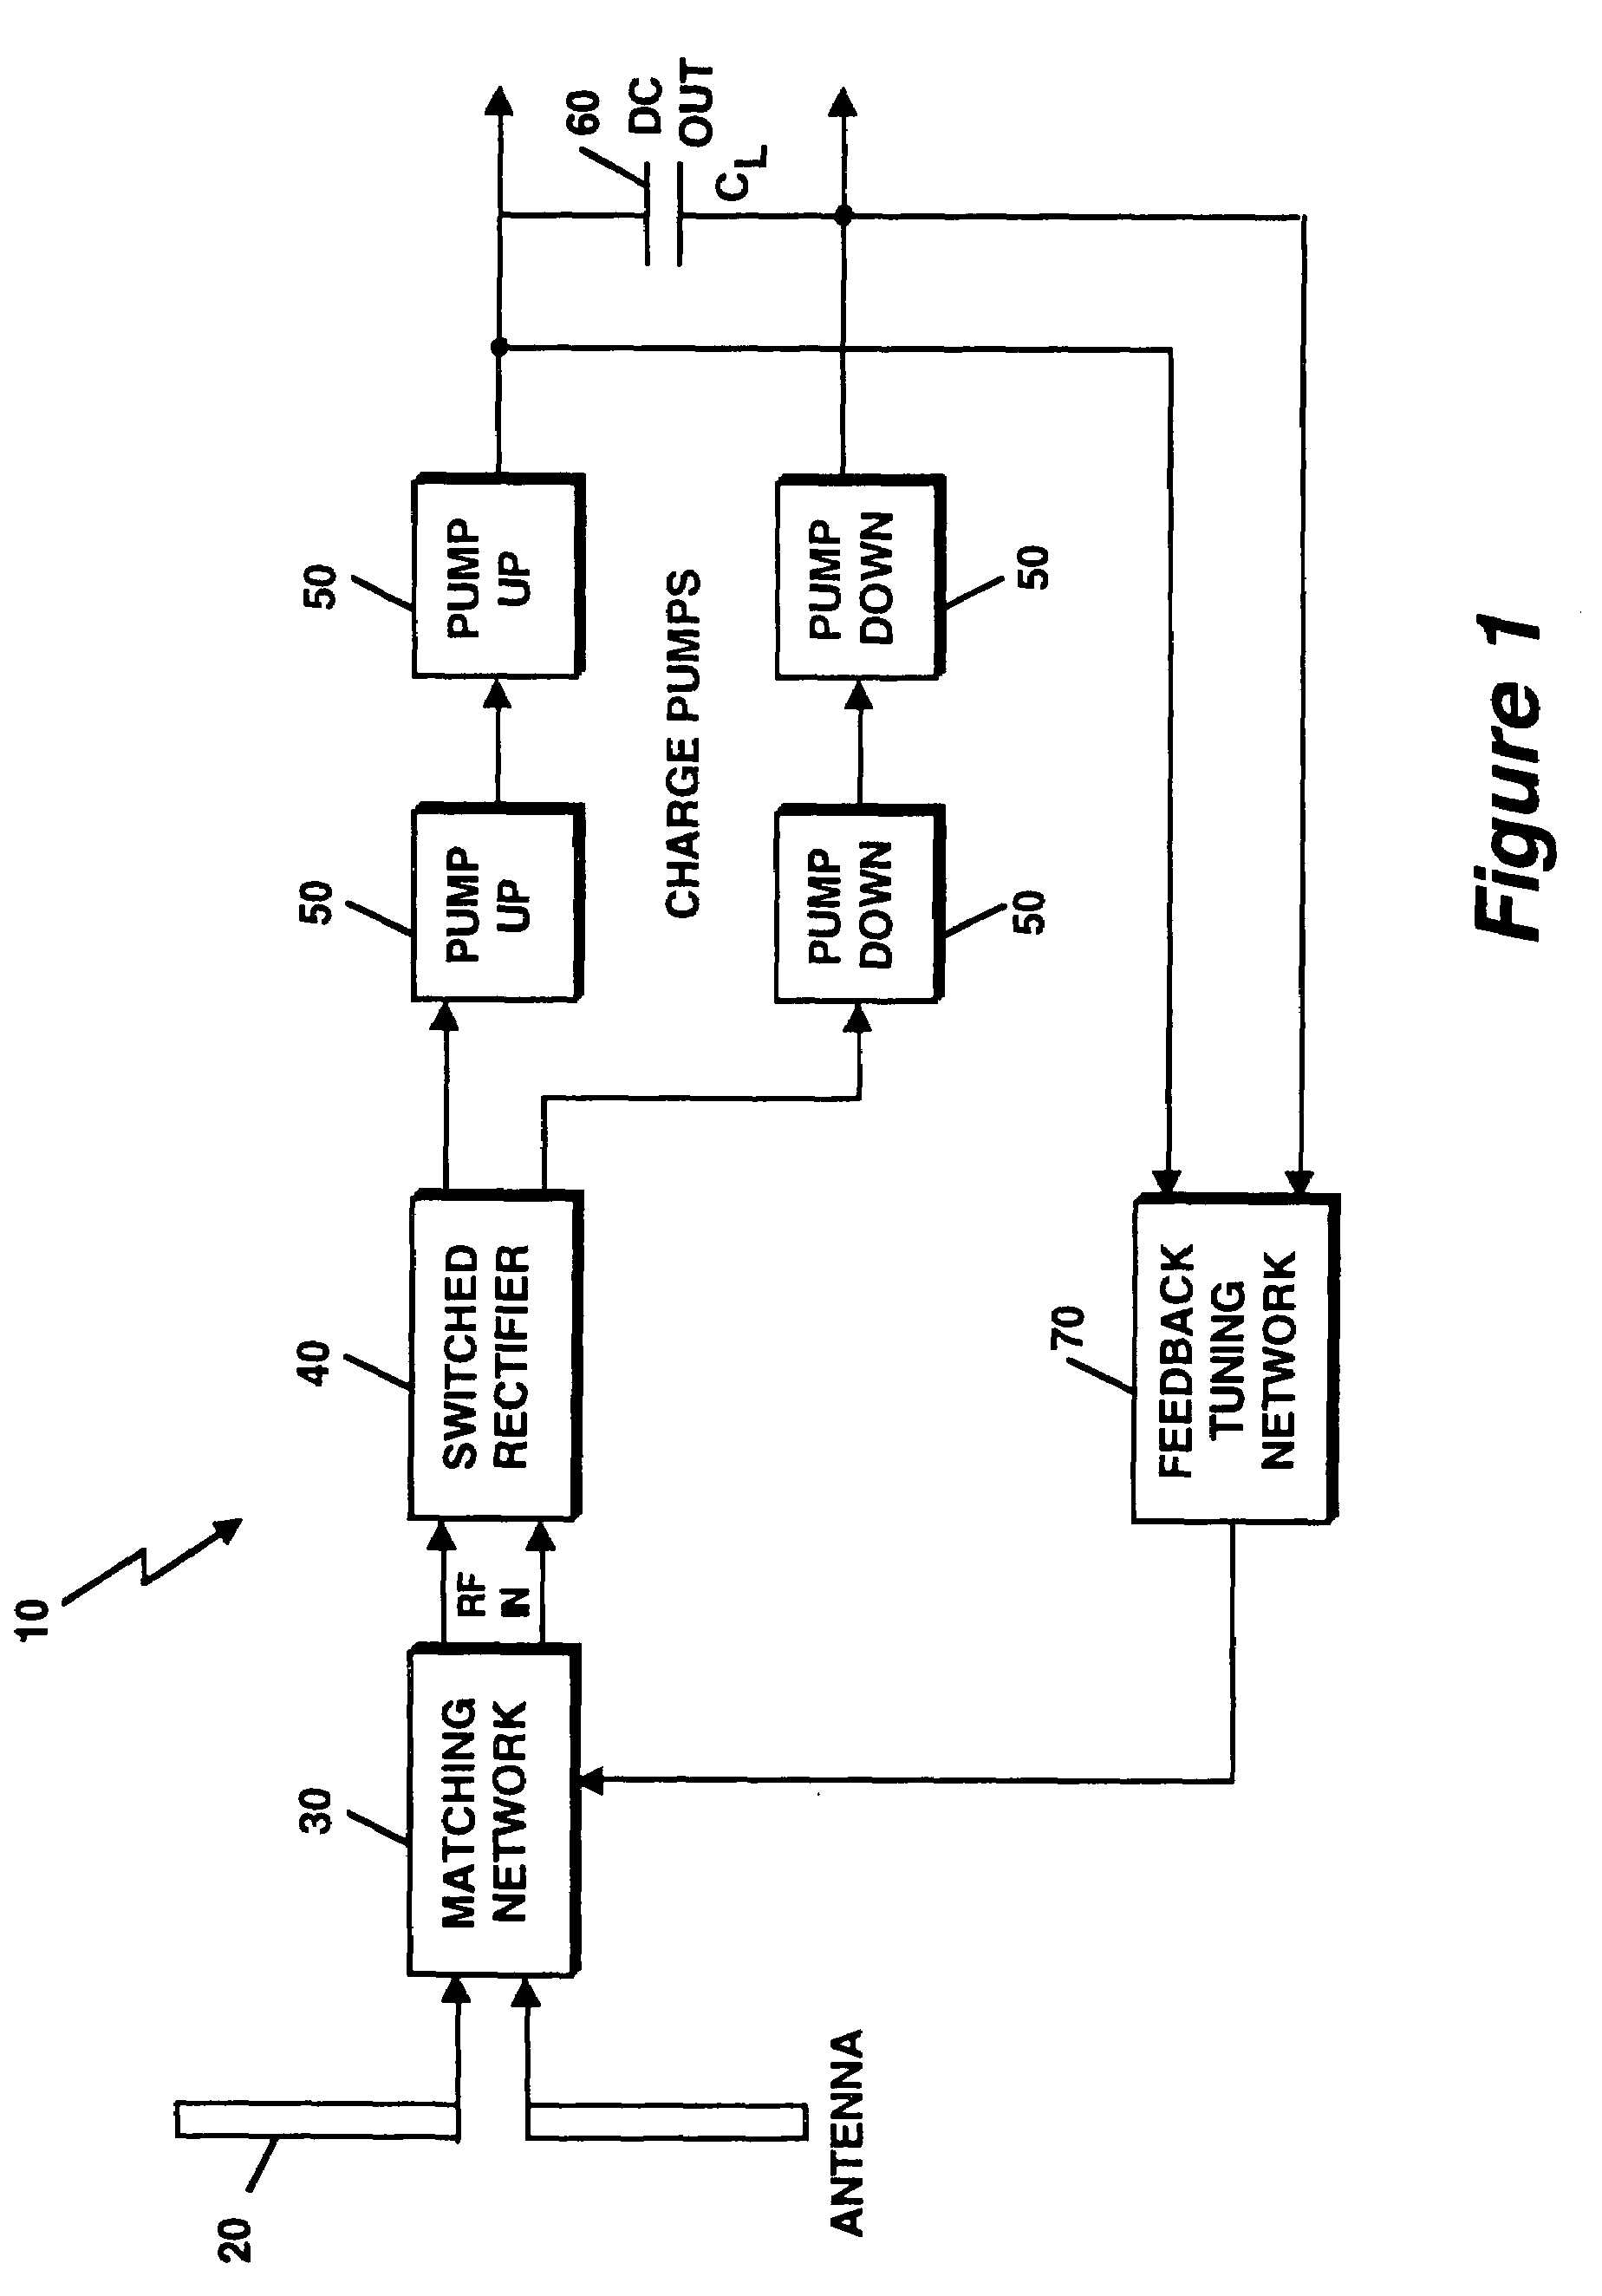 Far-field RF power extraction circuits and systems